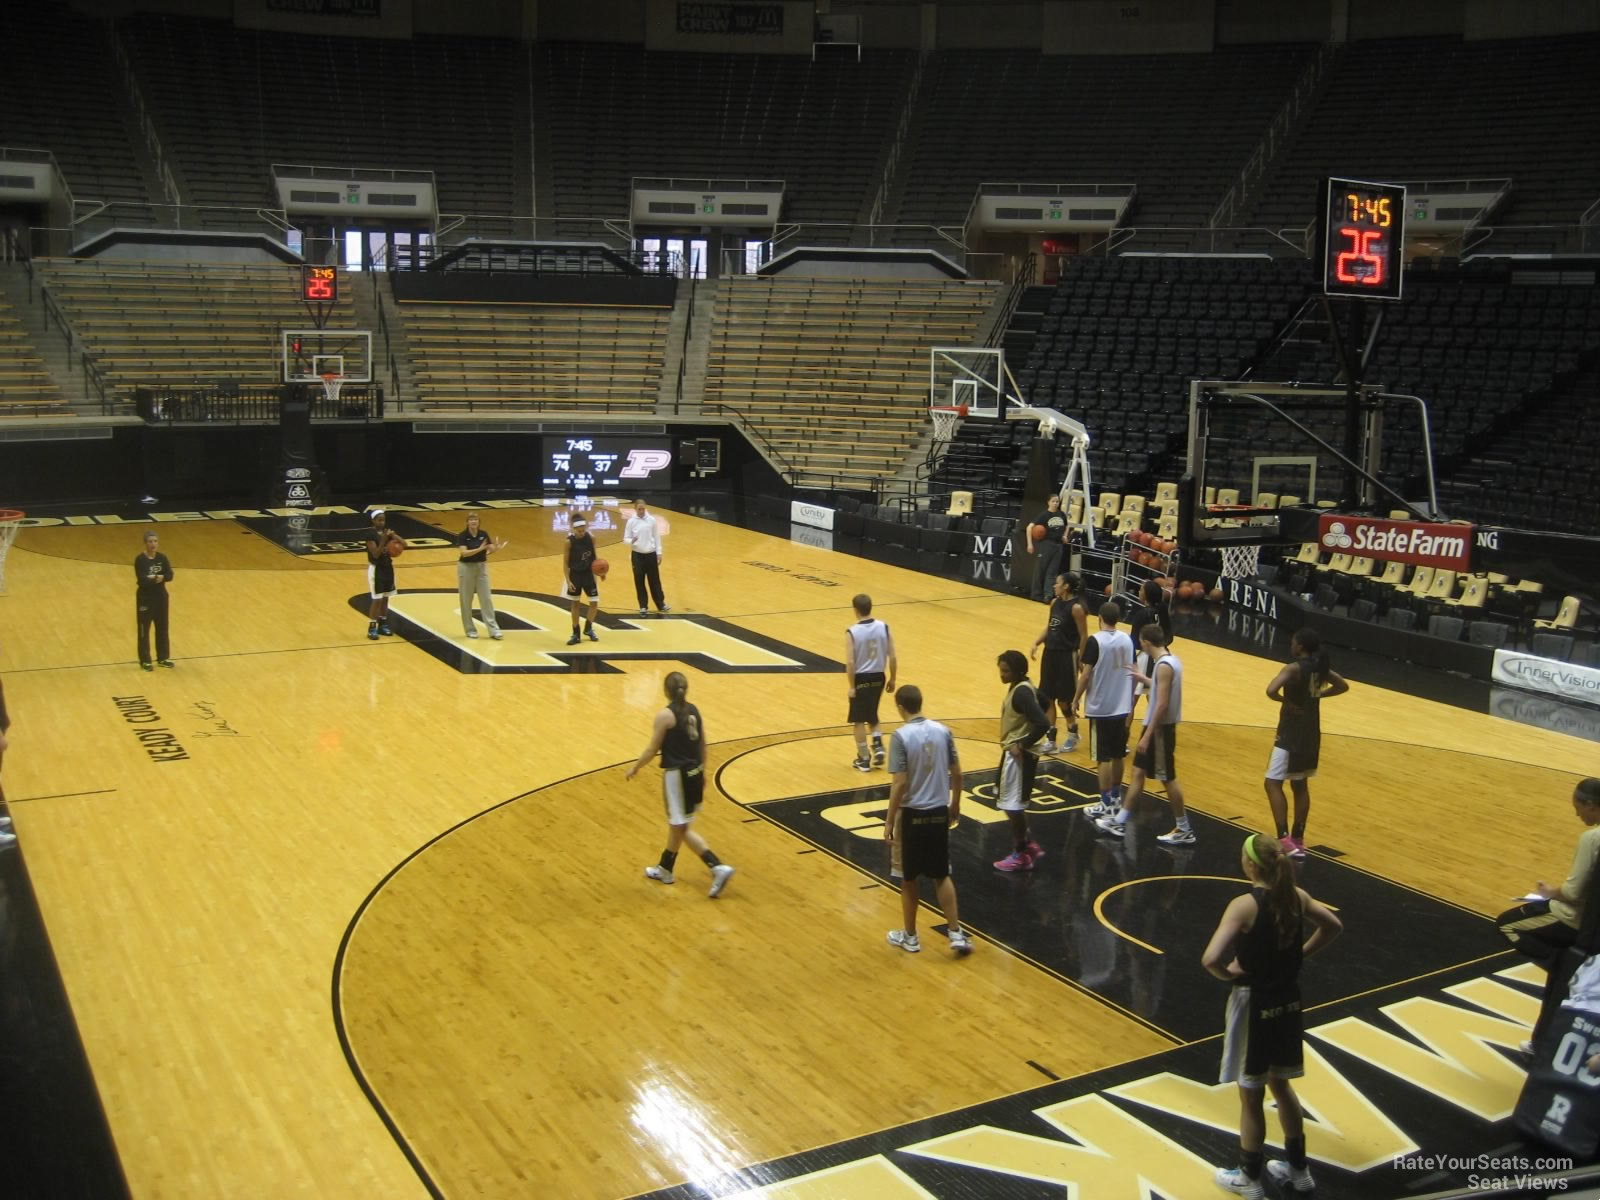 section 15, row 10 seat view  - mackey arena